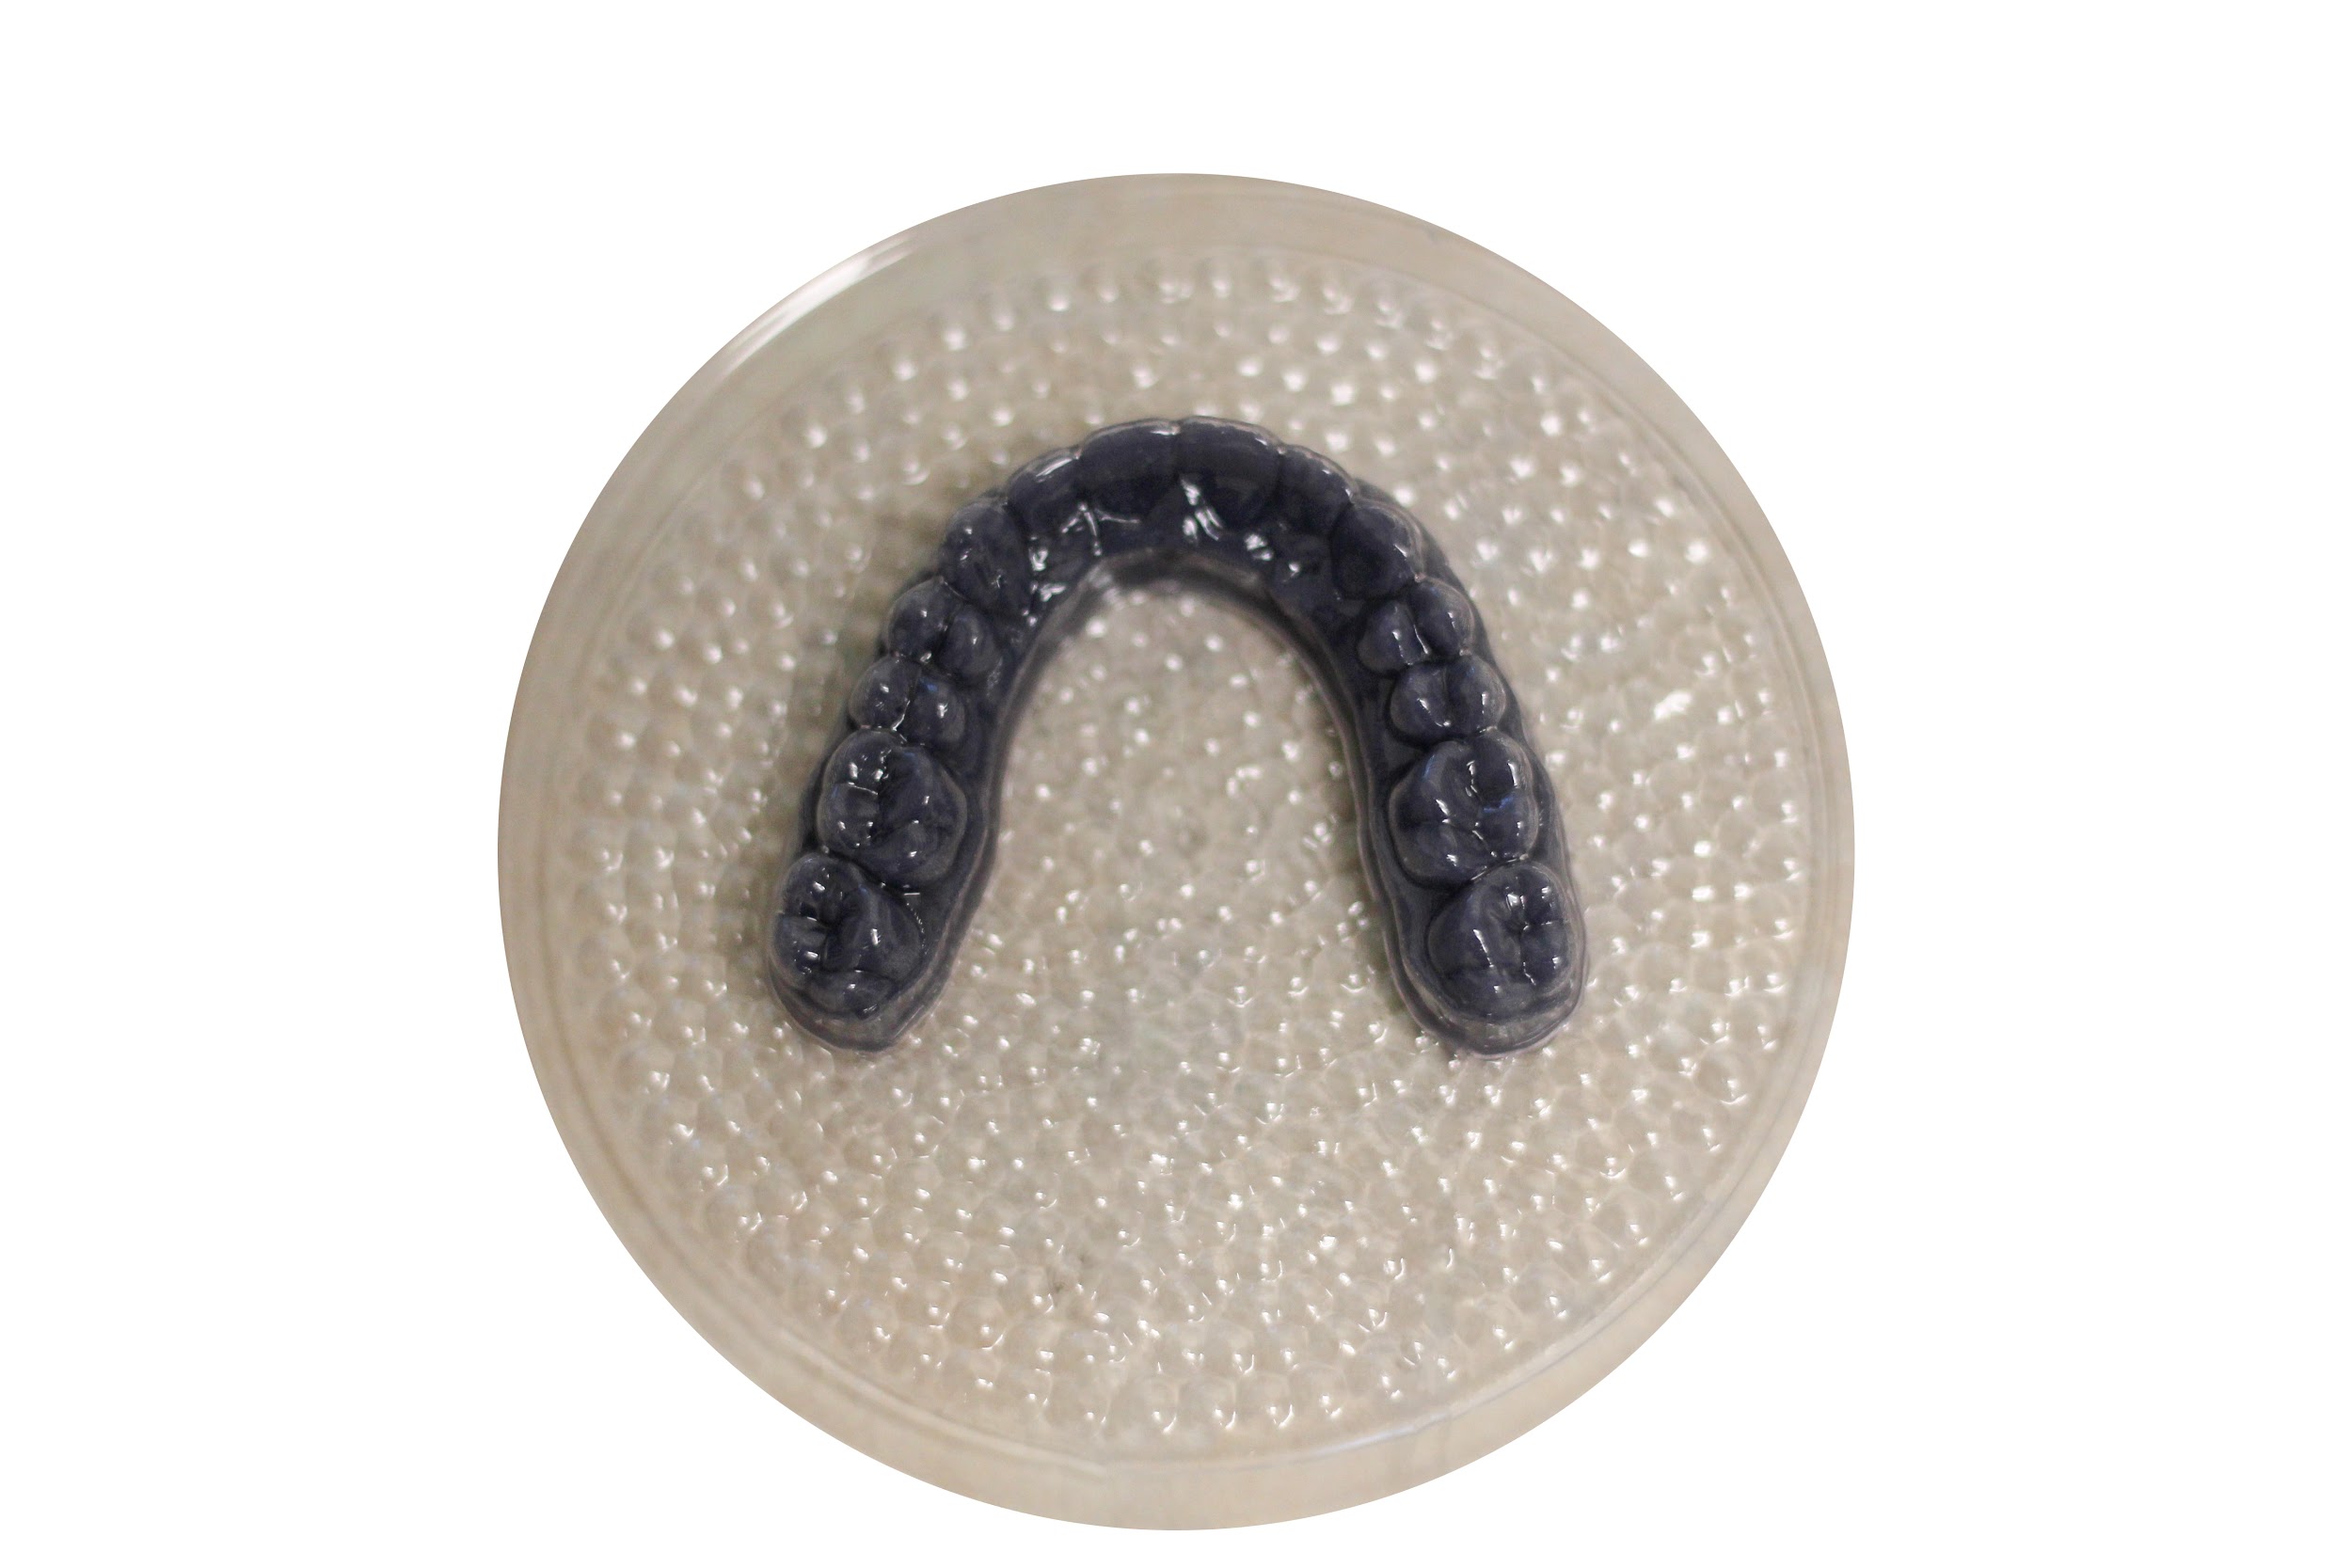 clear aligners with mold